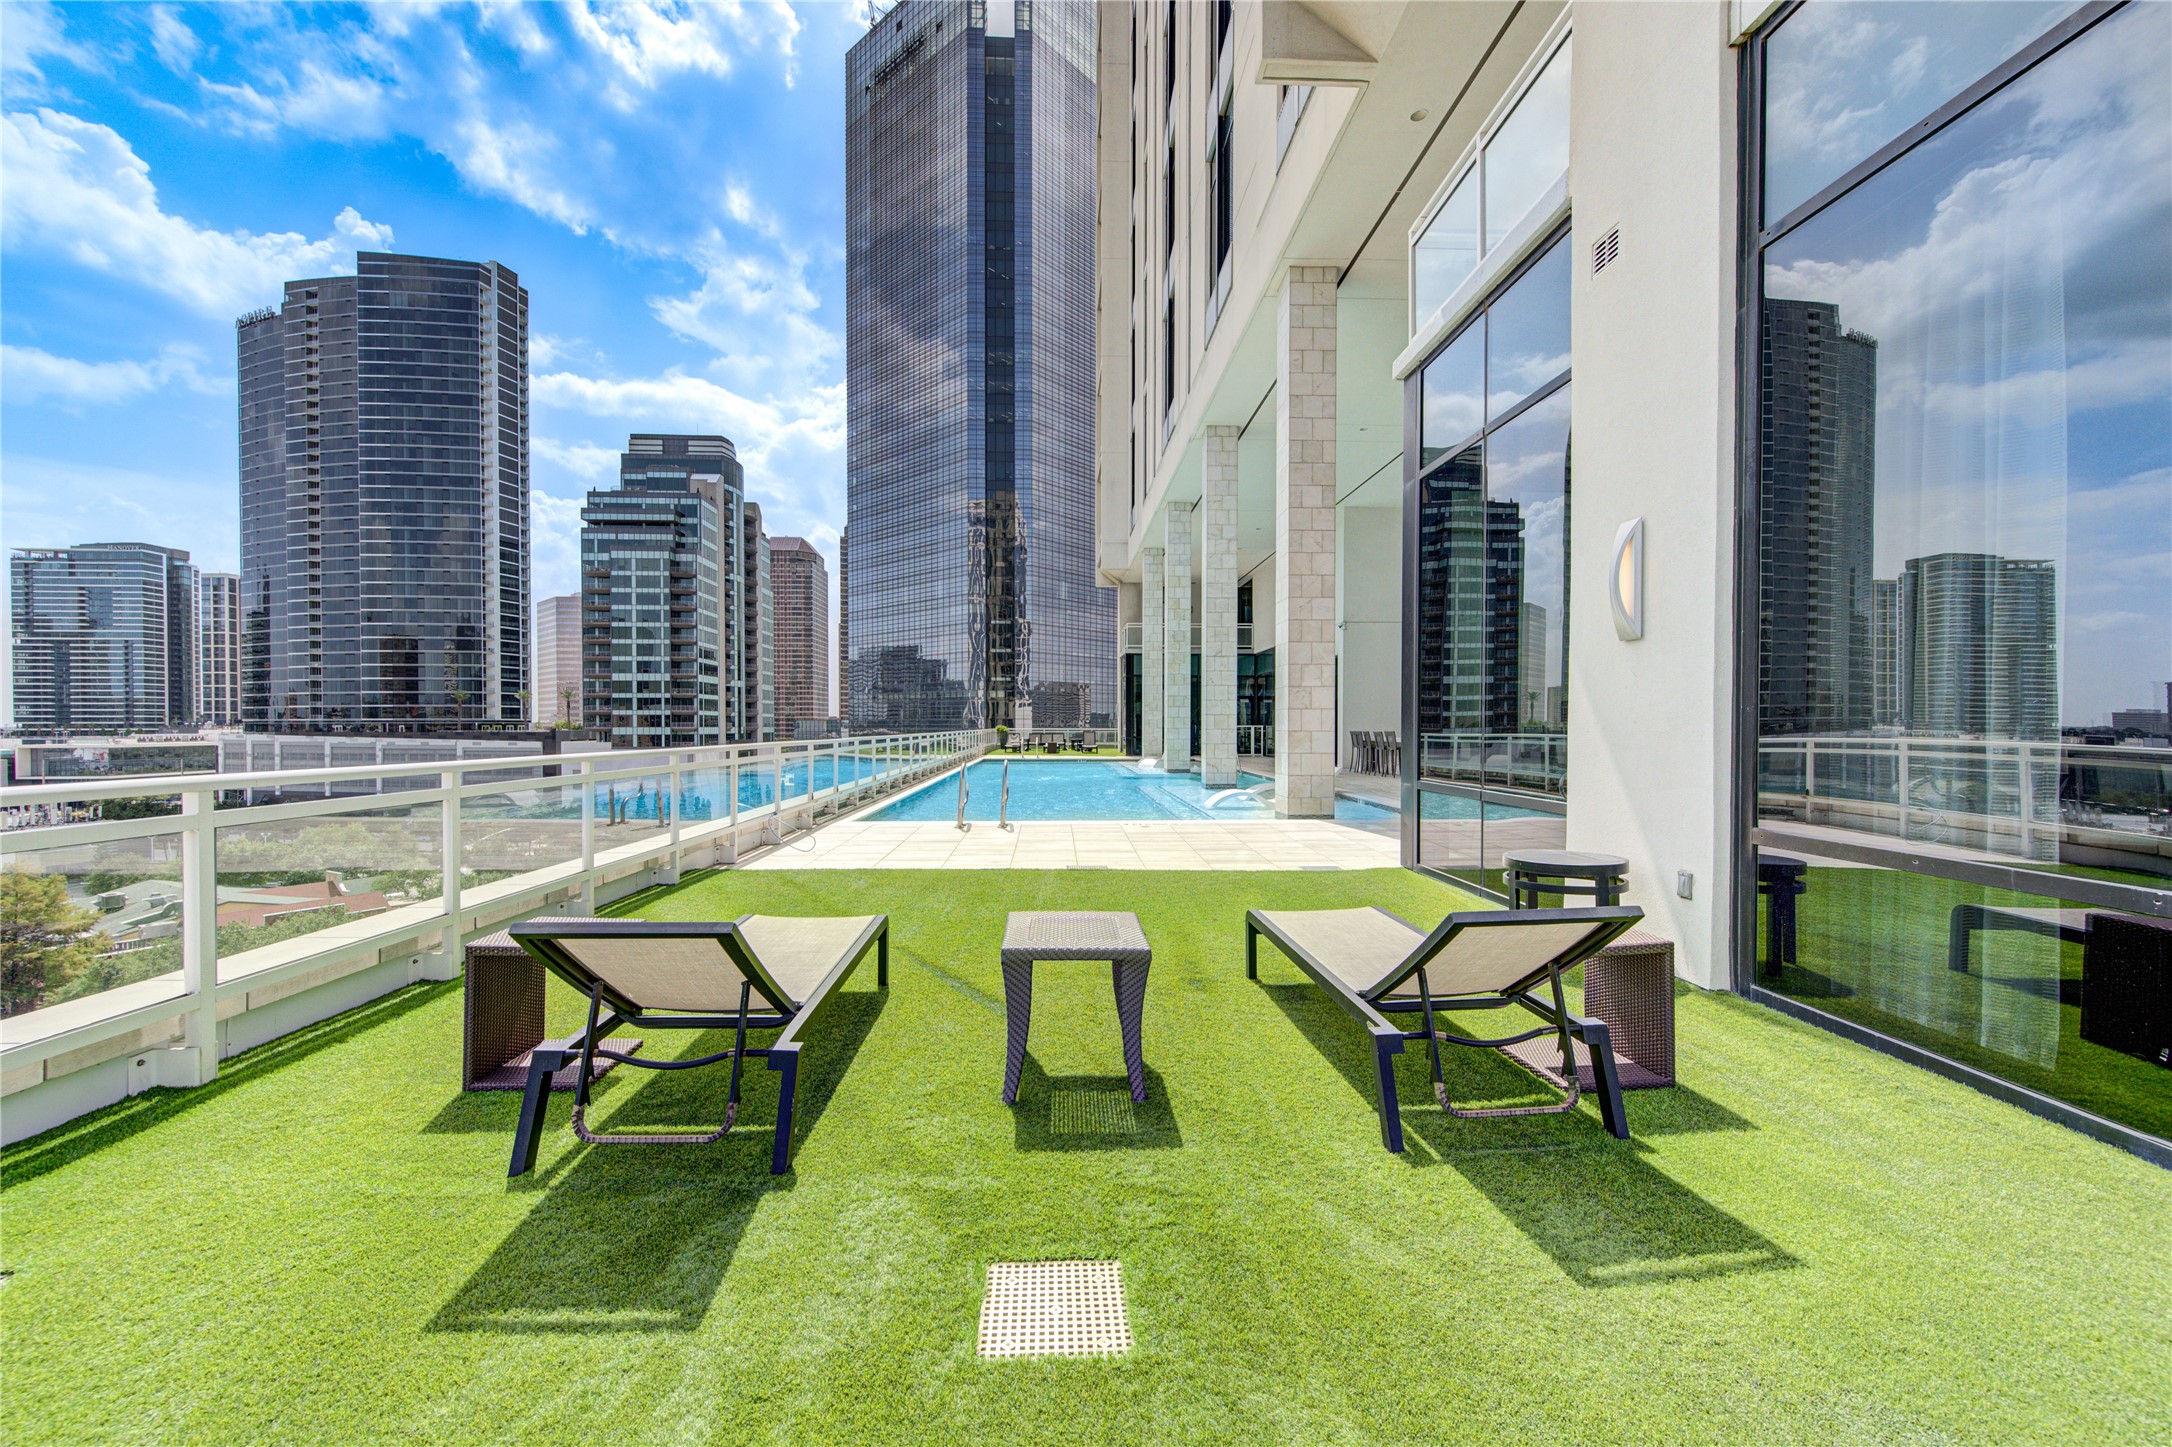 Enjoy views of Houston from the roof top pool that is maintained for all residents.